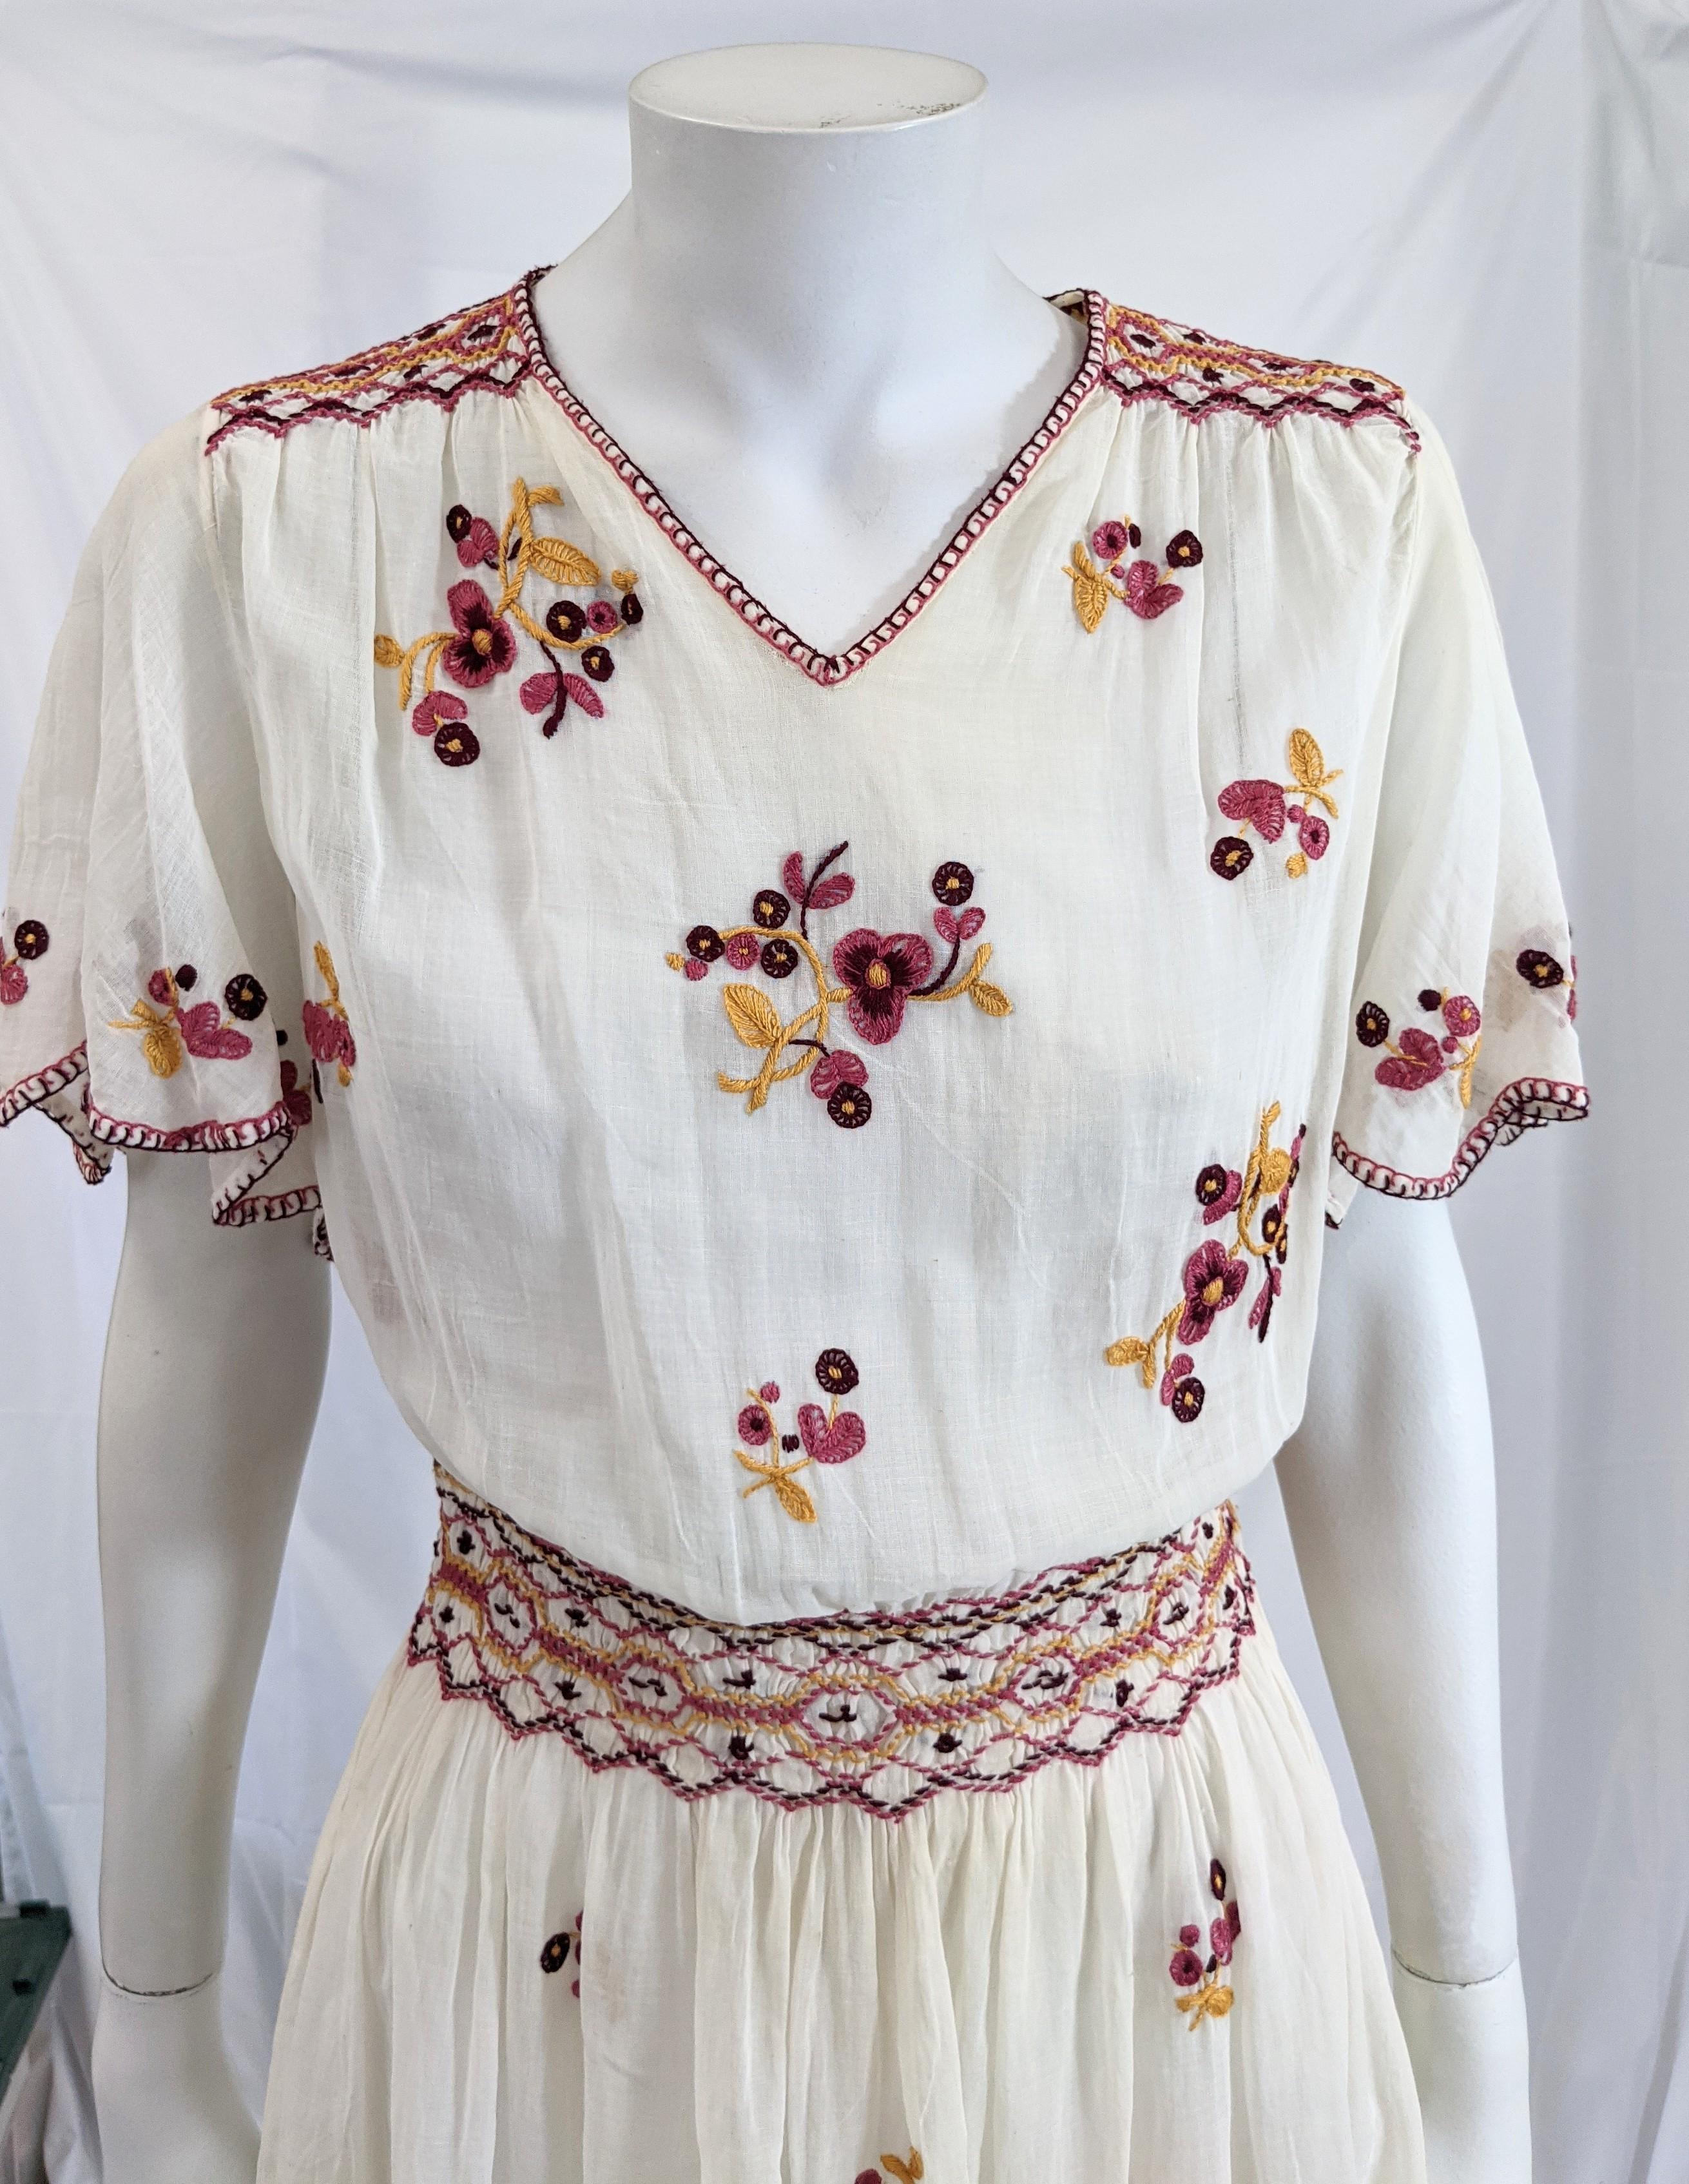 Charming Hungarian Embroidered Cotton Batiste Dress with smocked detailing from the 1920's. Unusual cut with flutter sleeves (instead of gathered) and hand embroidered sprays in maroon, pink and gold. 
Small size dress pulls over head with a few